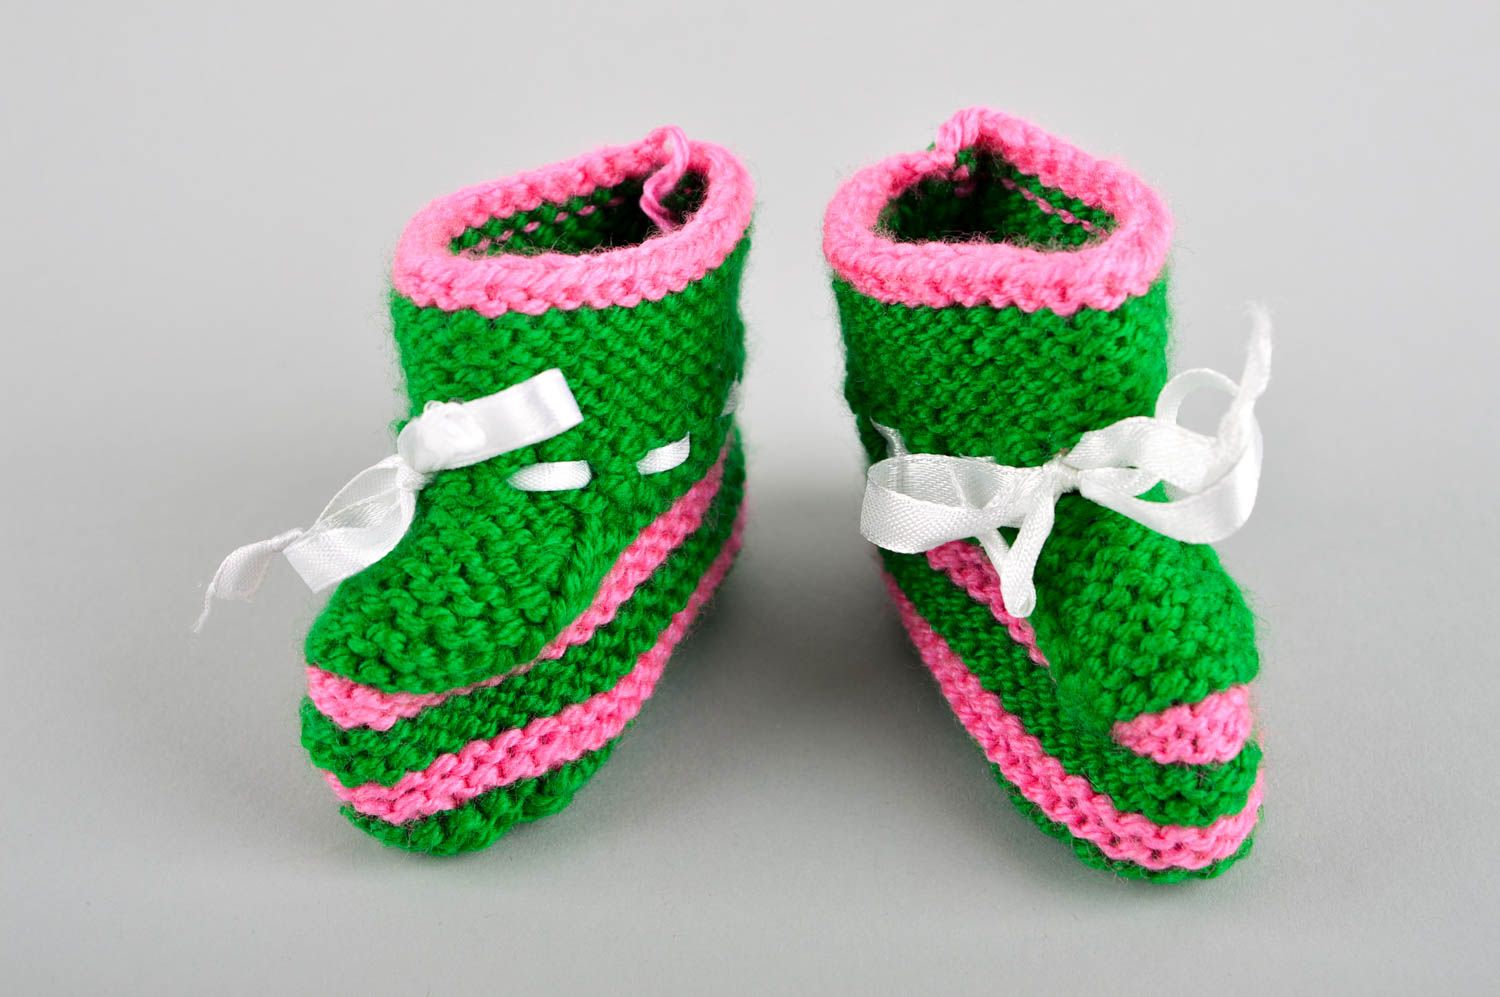 Handmade baby shoes crochet baby shoes baby socks goods for children kids gifts photo 2